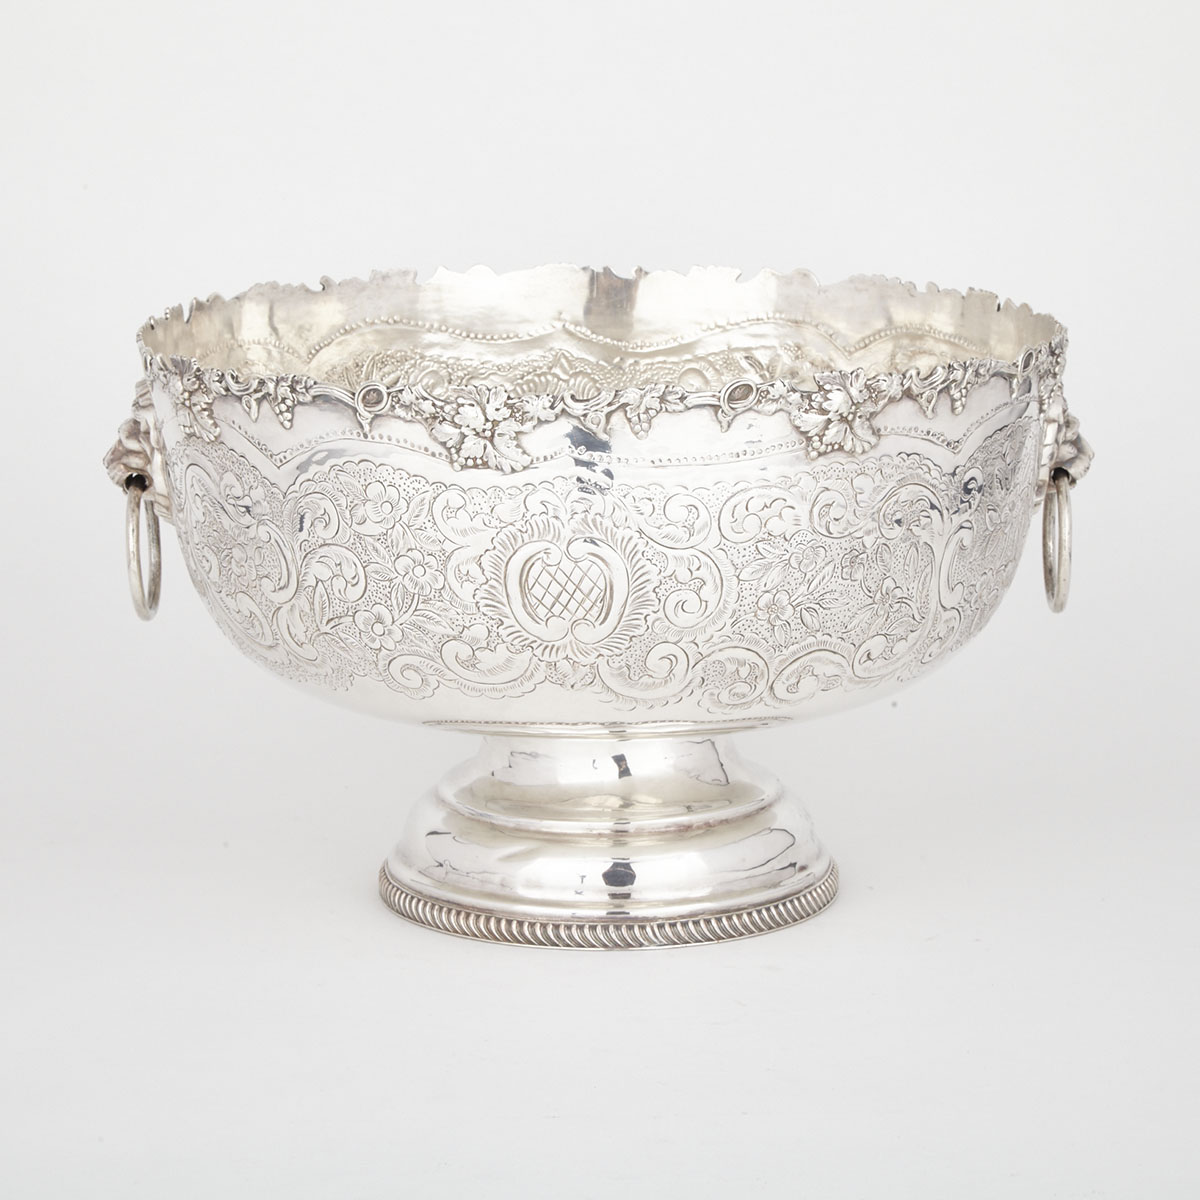 English Silver Plated Large Punch Bowl, 20th century